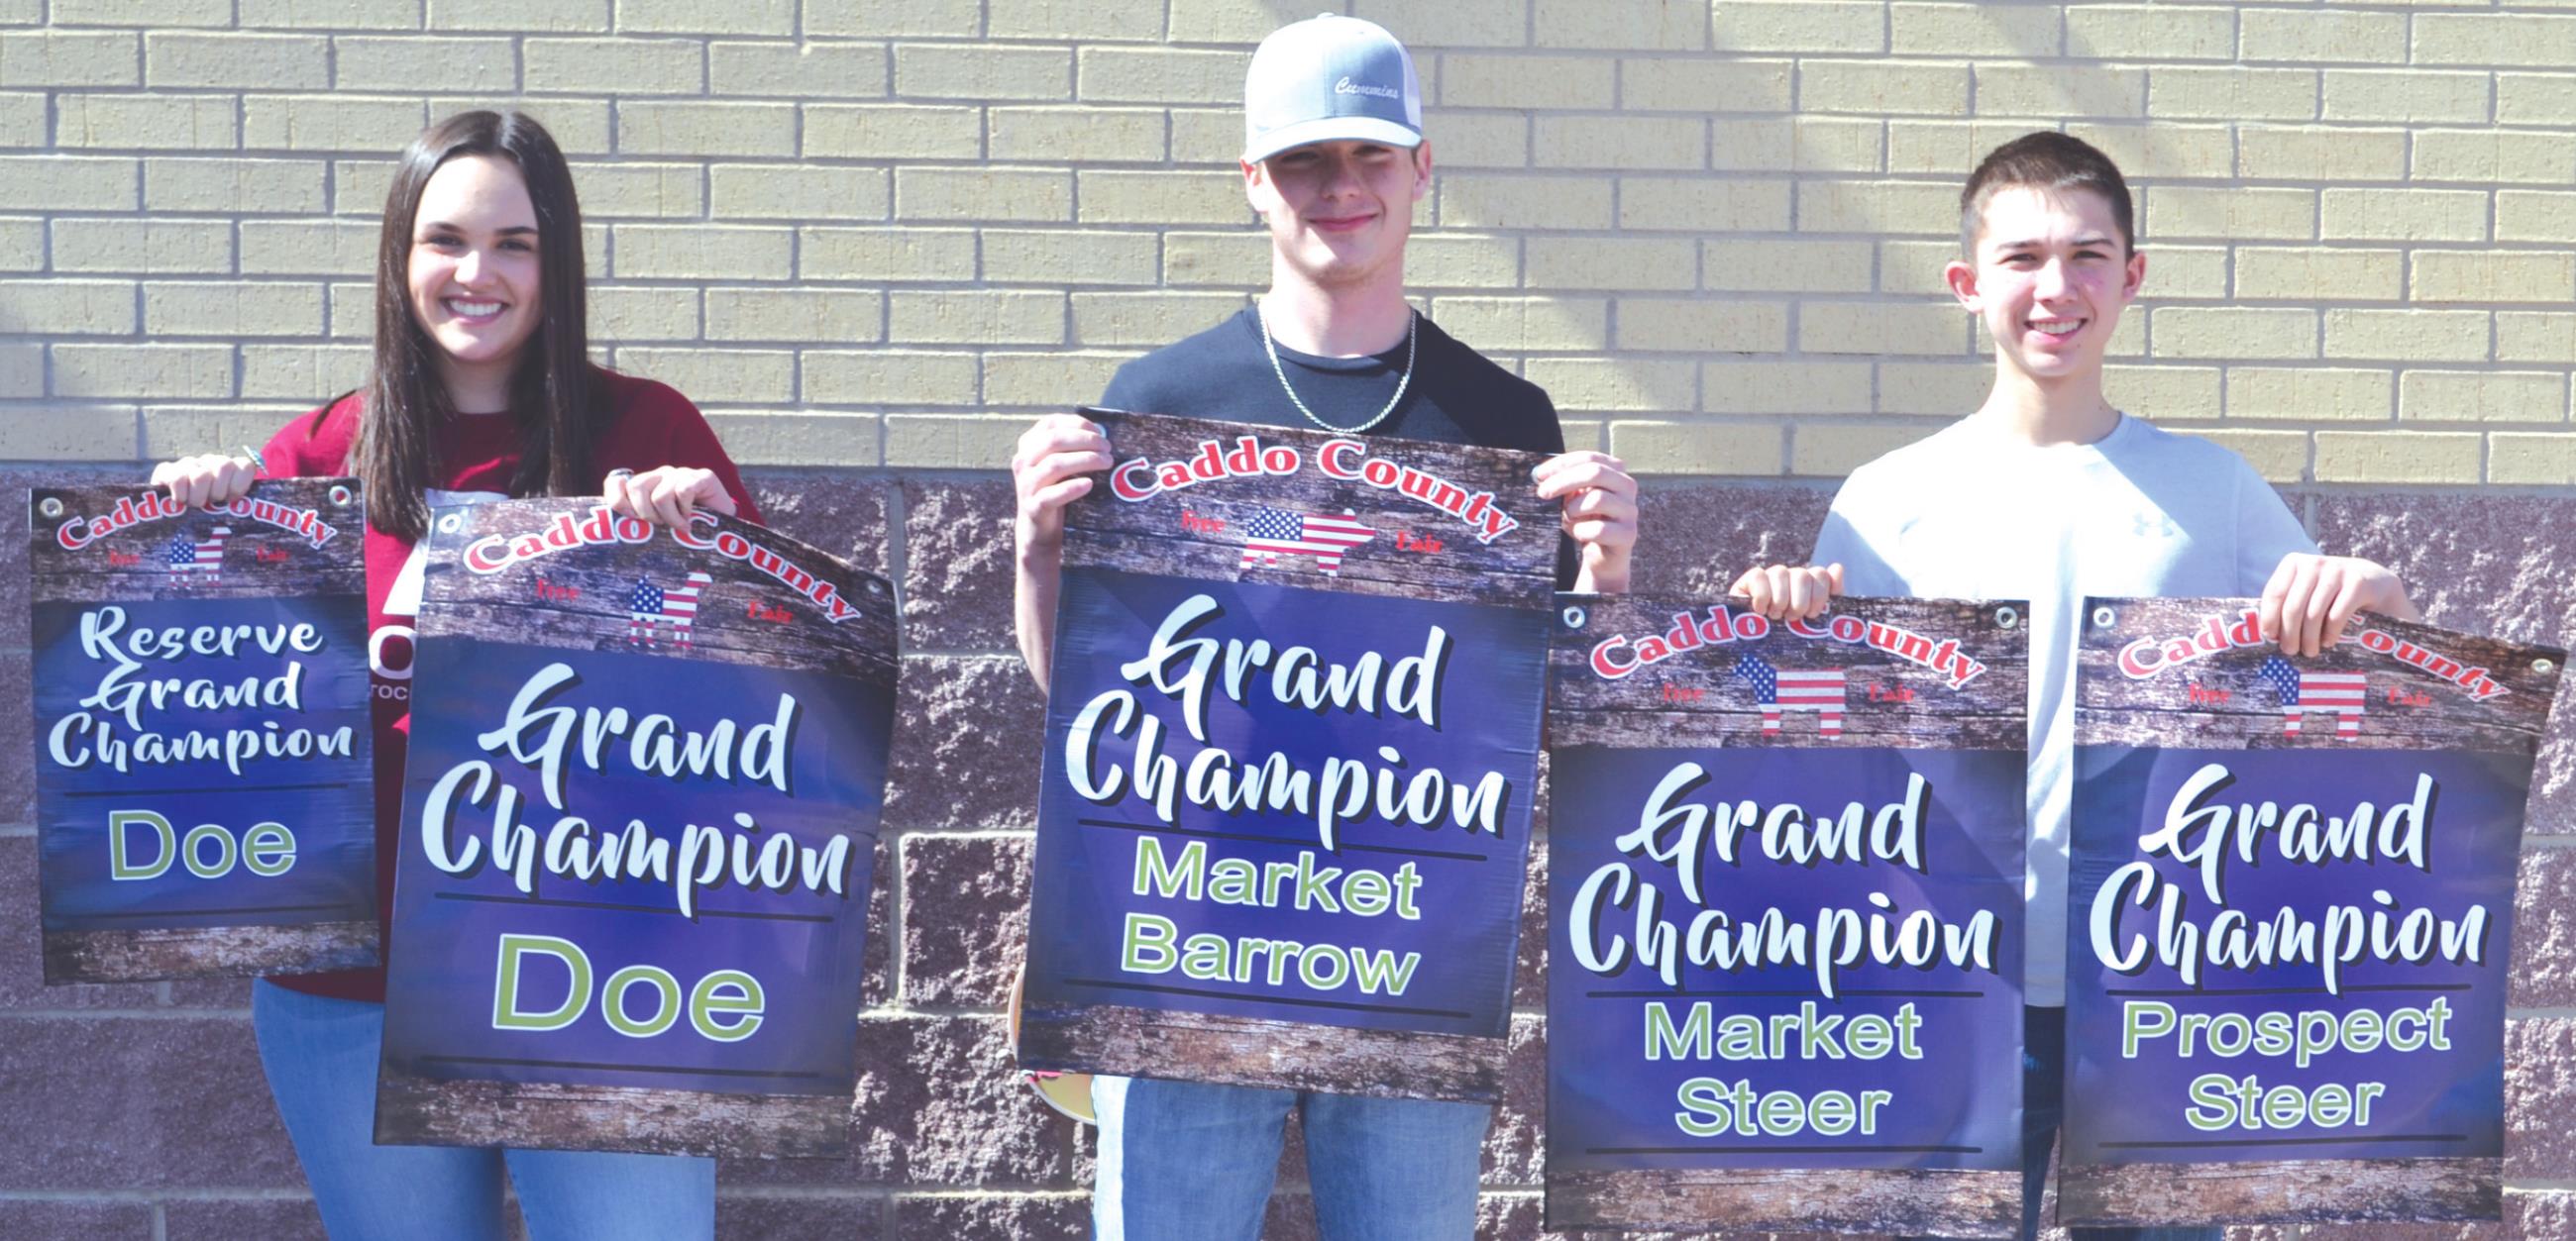 Tabrey Lierle, Cade Rea and Rider Klaassen show off their awards from the Caddo County Livestock Show this week. Provided